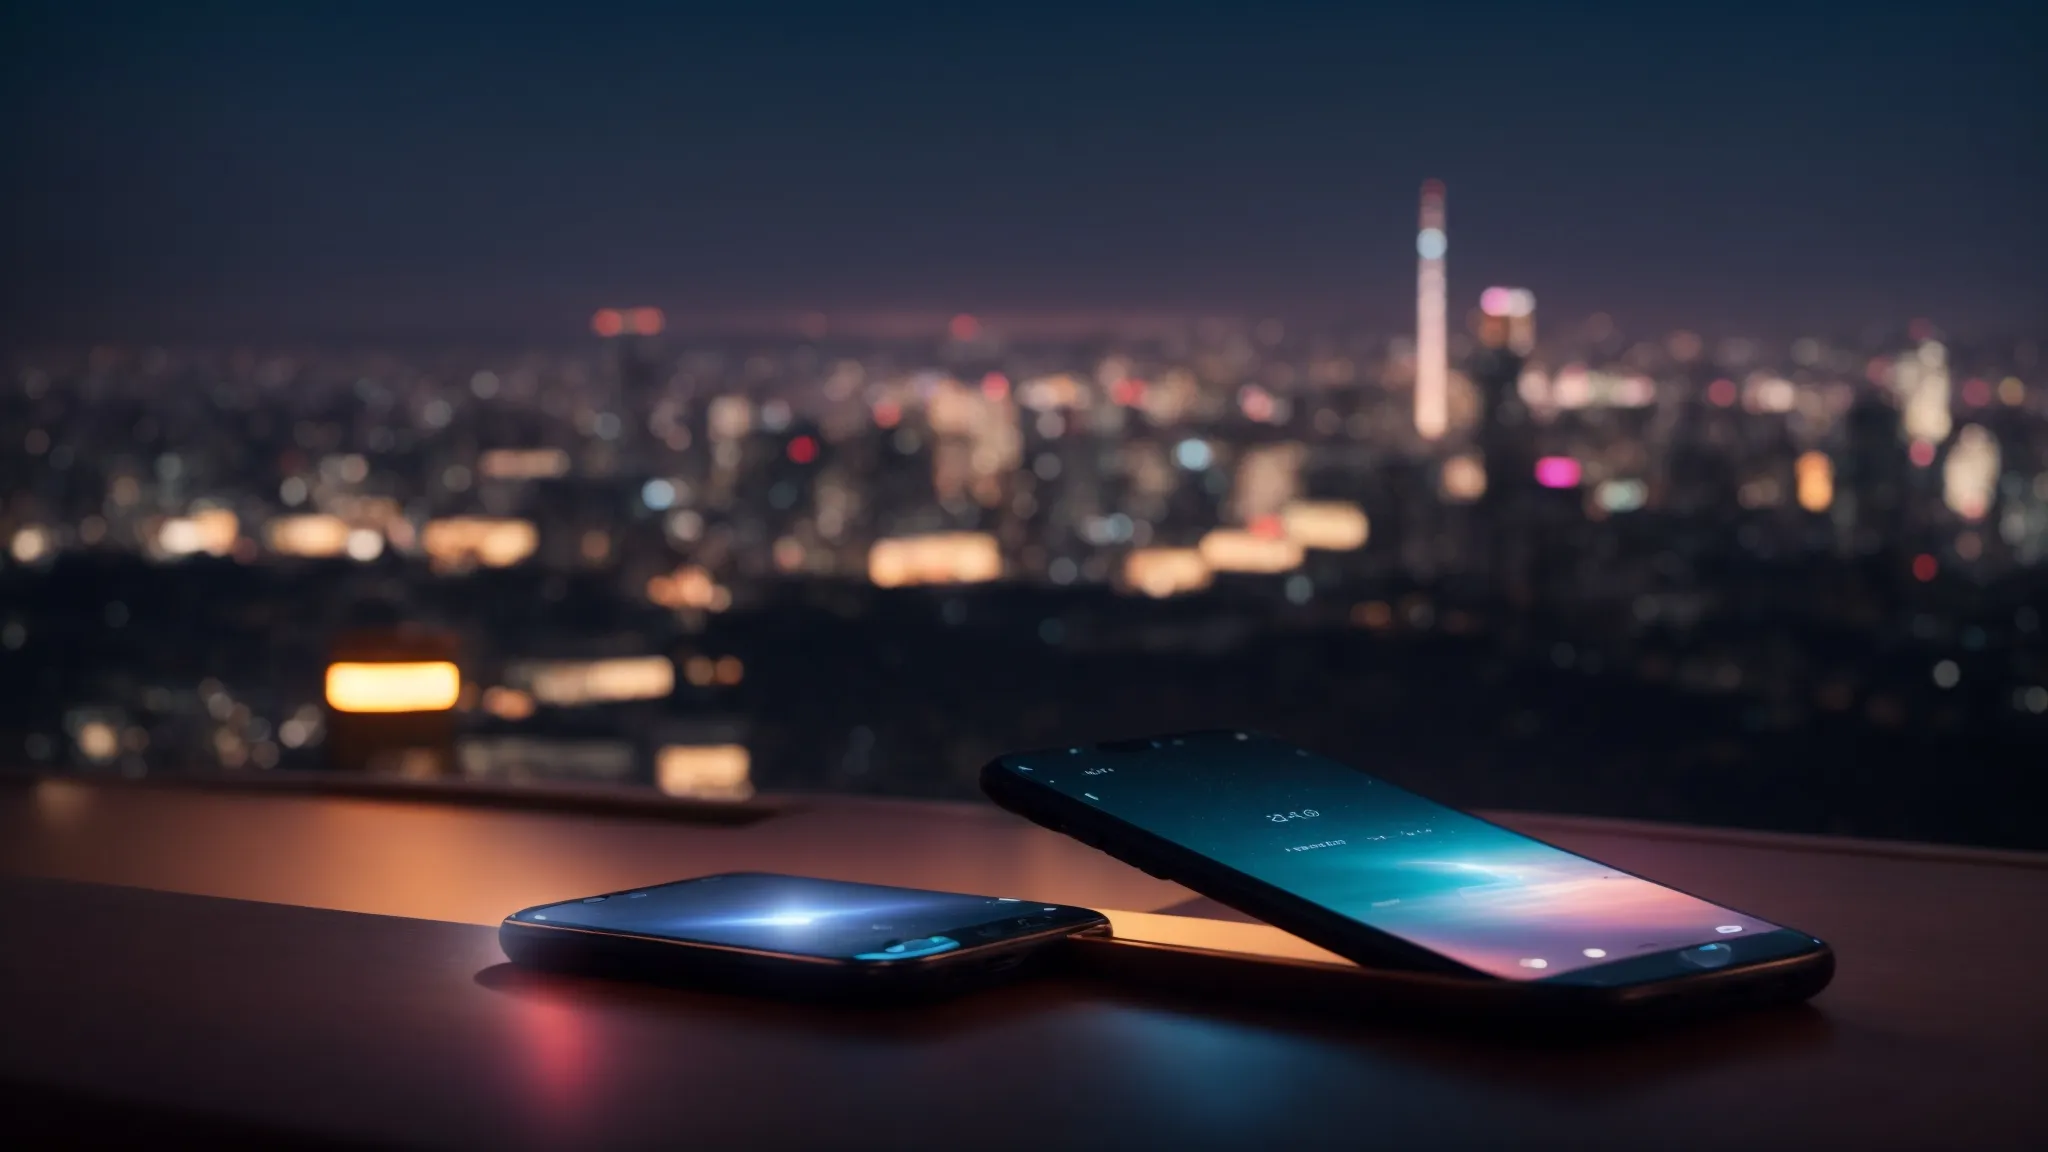 a futuristic smartphone emitting a soft glow, placed on a table against a backdrop of a glowing city skyline at dusk, symbolizing the dawn of new technologies in mobile communication.